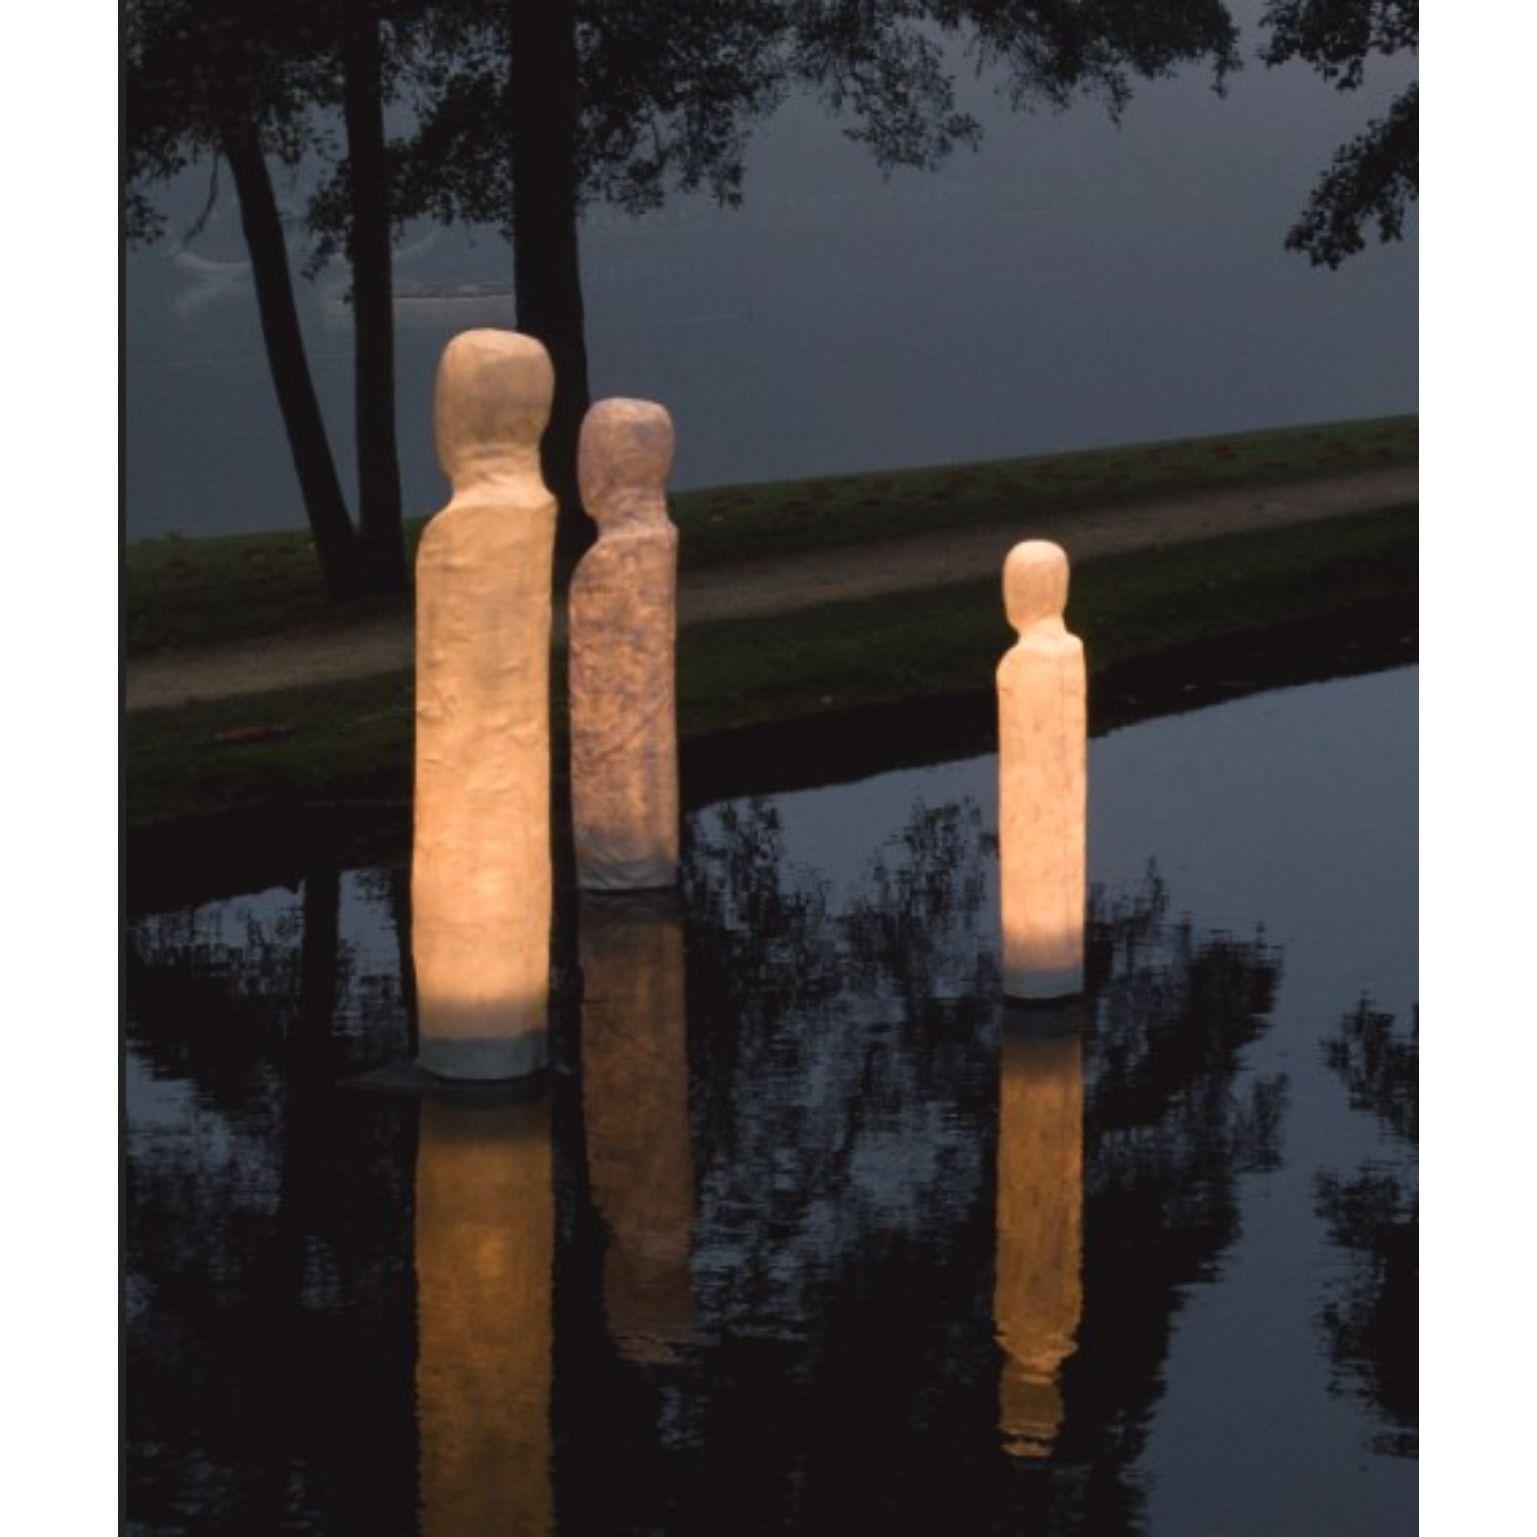 A set of 3 anonymus family - Light sculptures by Atelier Haute Cuisine
Dimensions: 180 x 28 cm, 185 x 34, 210 x 41 cm 
Materials: Fiberglass, UV, weather resistant topcoat, E27 LED, metal base
 
This serie of light sculptures is created through